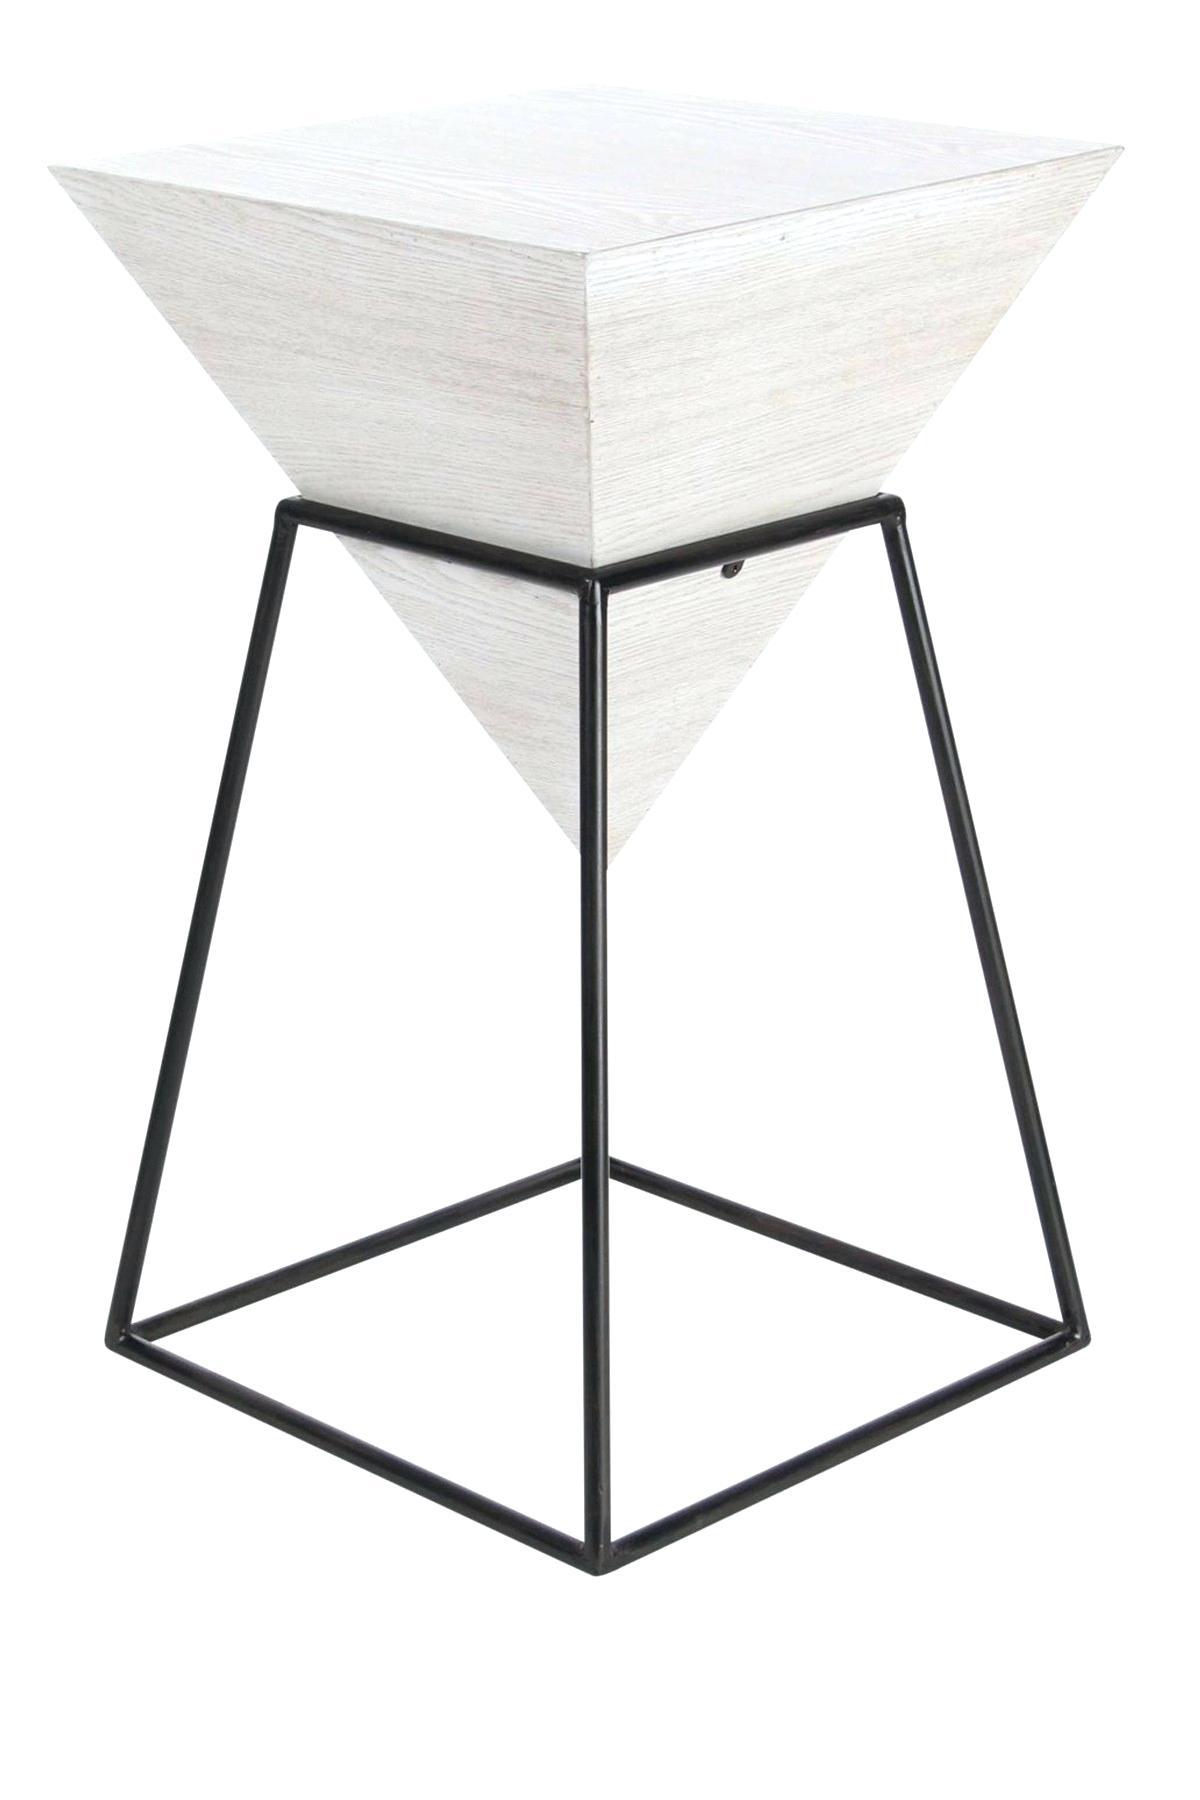 metal accent table round distressed target wood outdoor drum mirror over storage ikea threshold modern furniture mississauga white marble cocktail bedroom sets nesting bedside